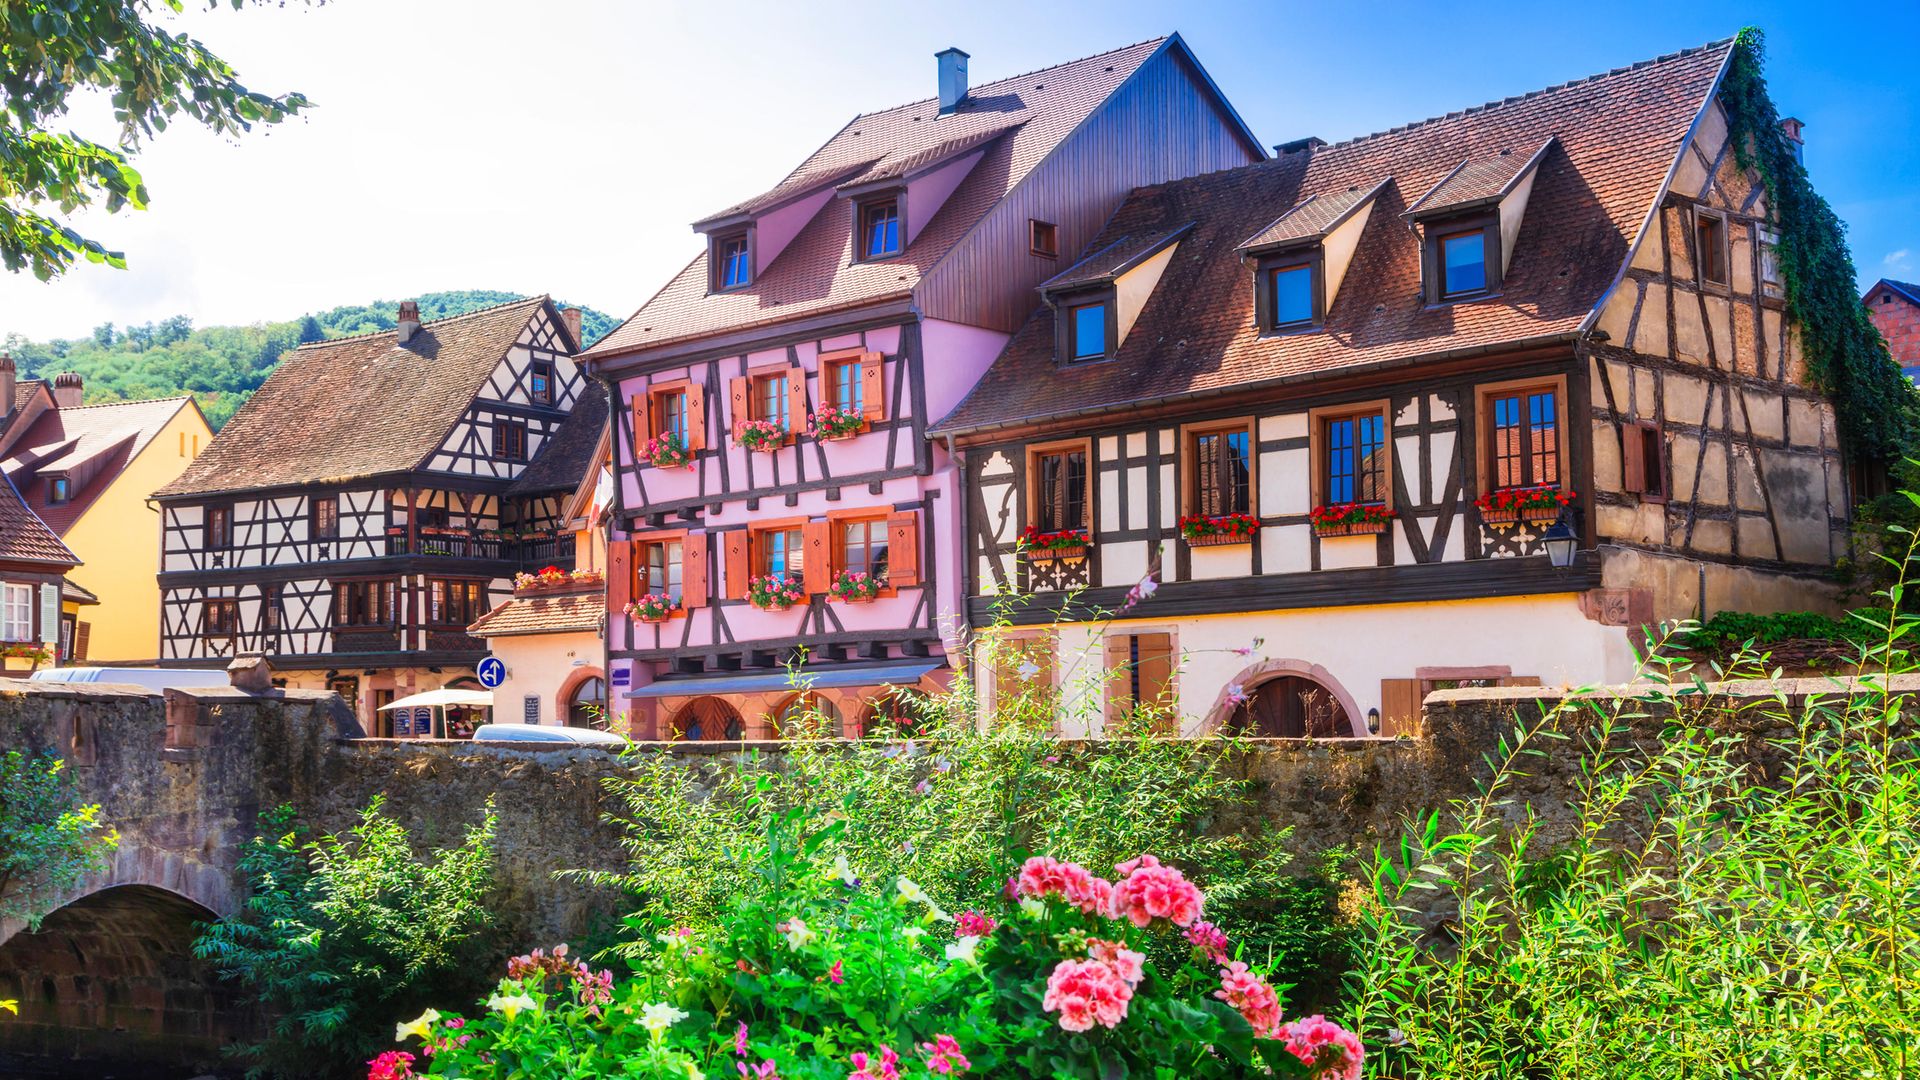 Complete Guide to Alsace, France: What to See & Do